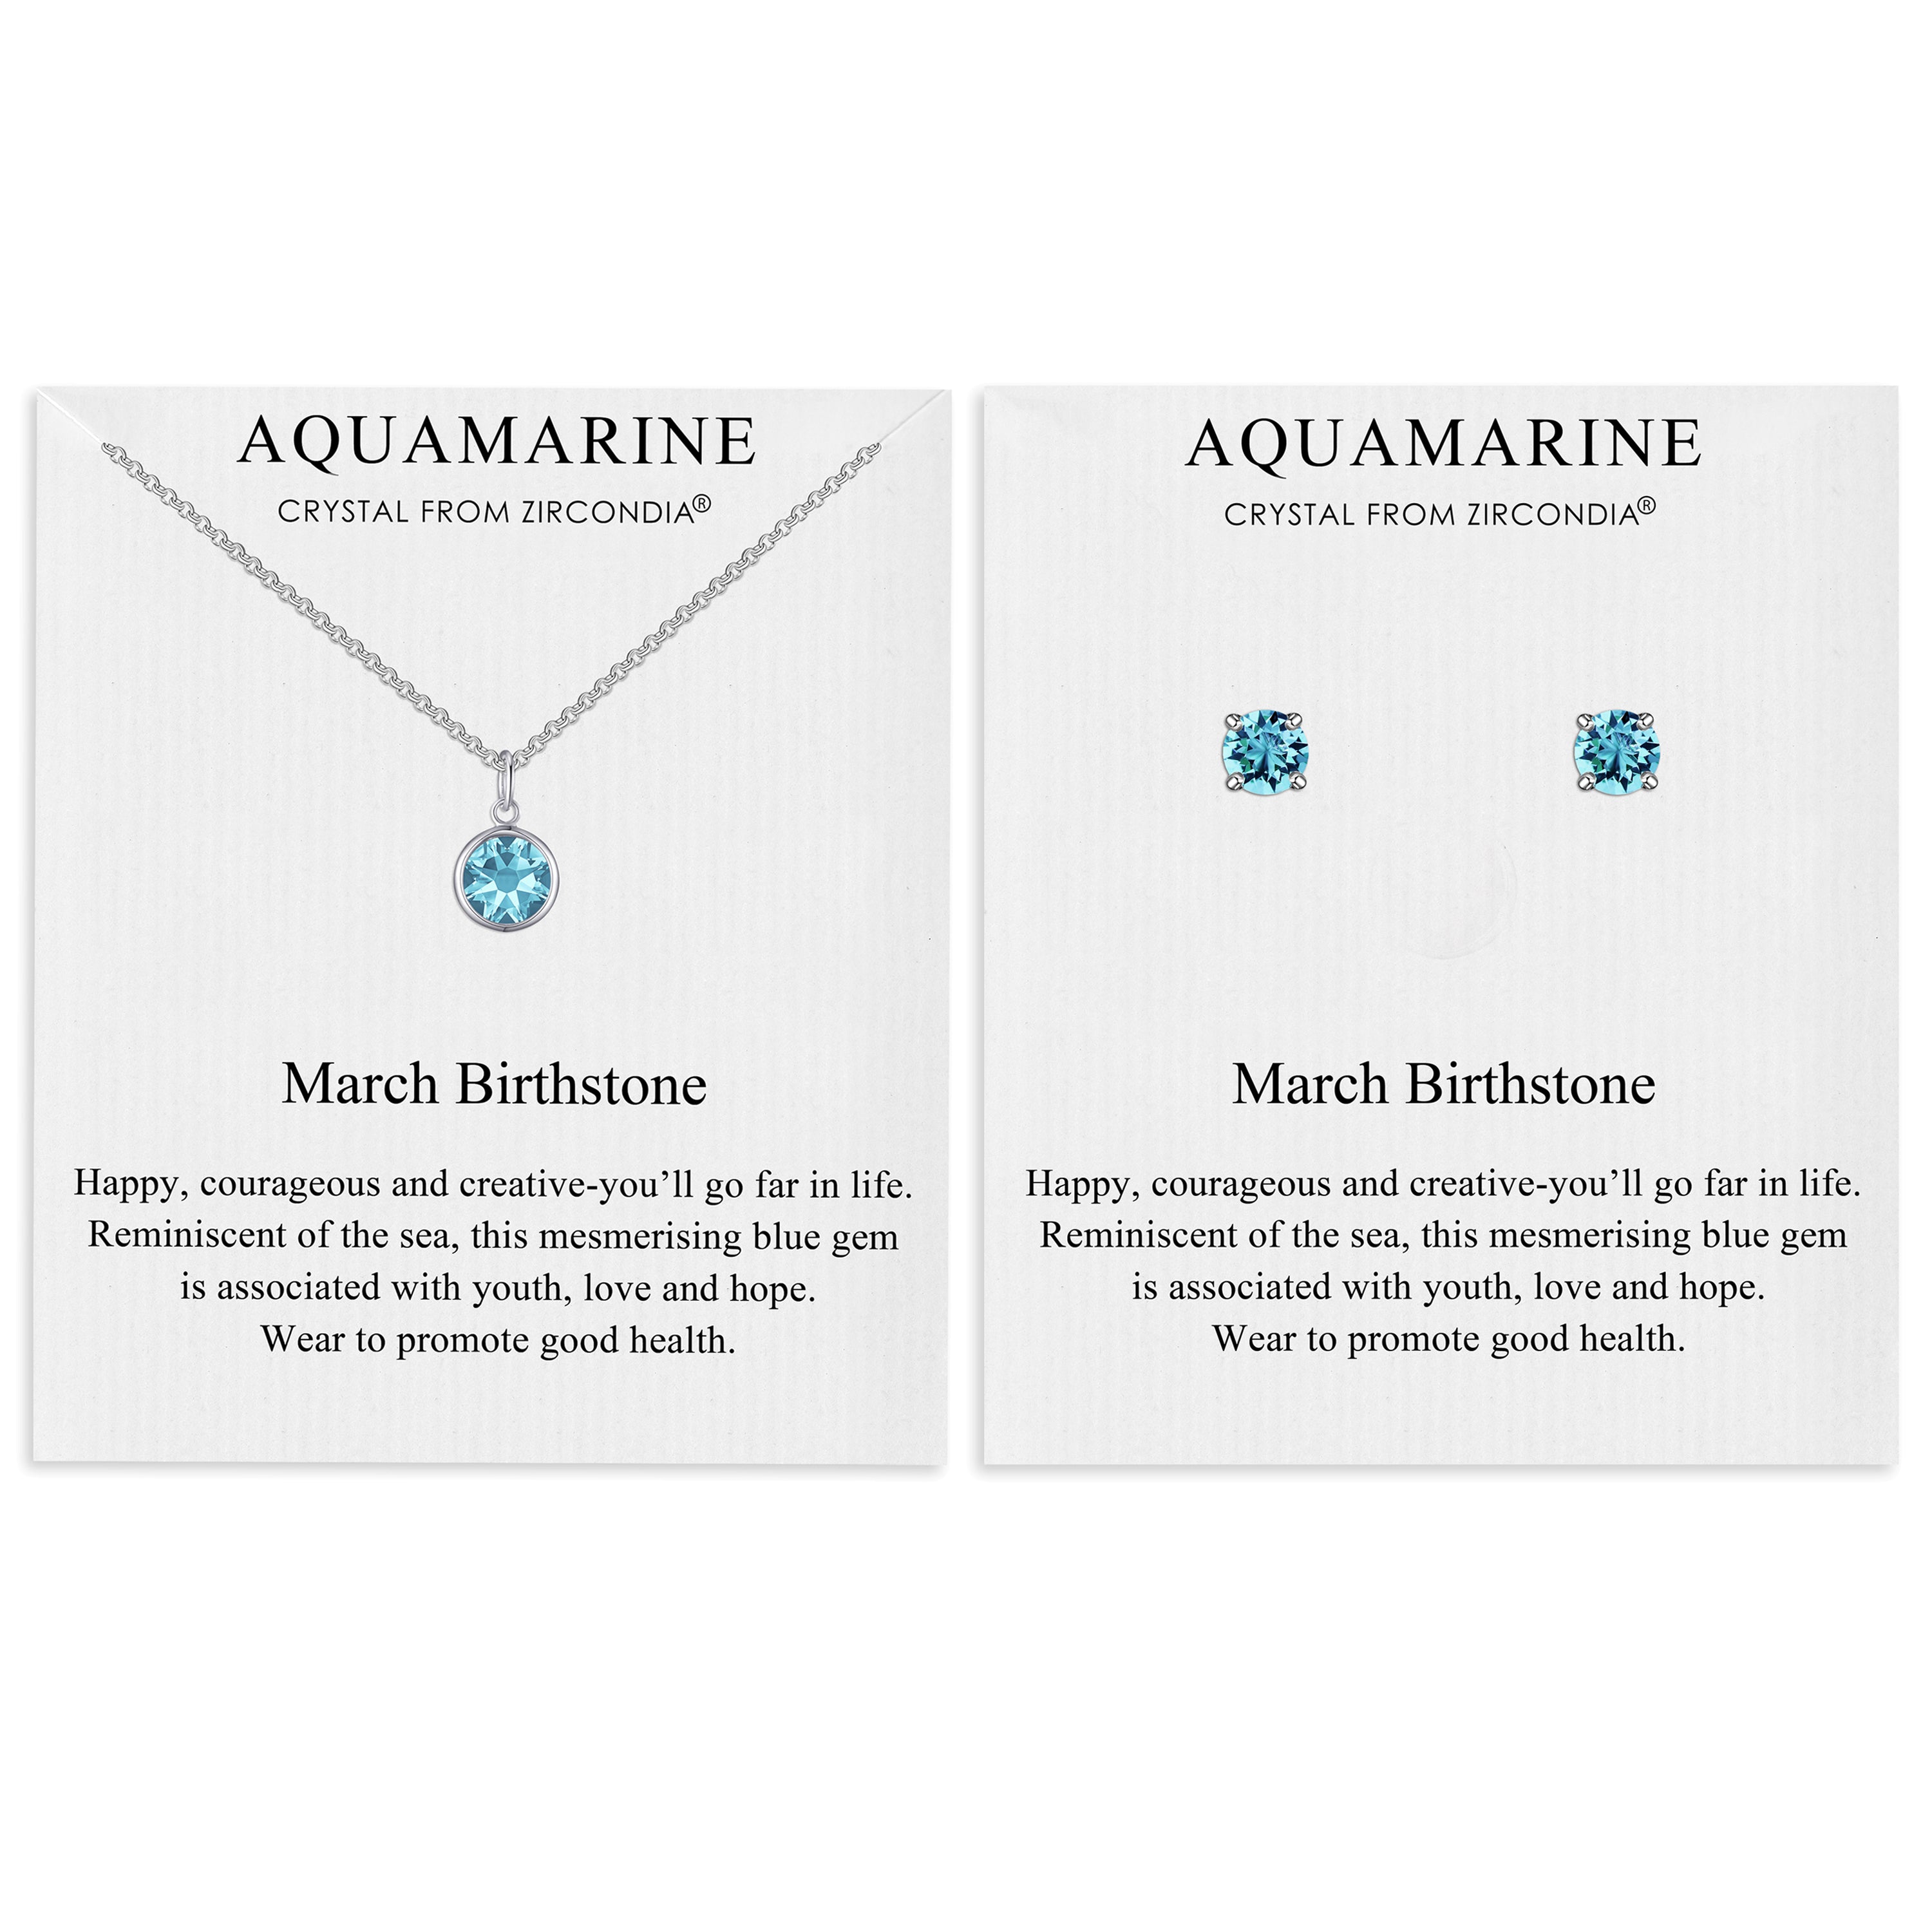 March (Aquamarine) Birthstone Necklace & Earrings Set Created with Zircondia® Crystals by Philip Jones Jewellery